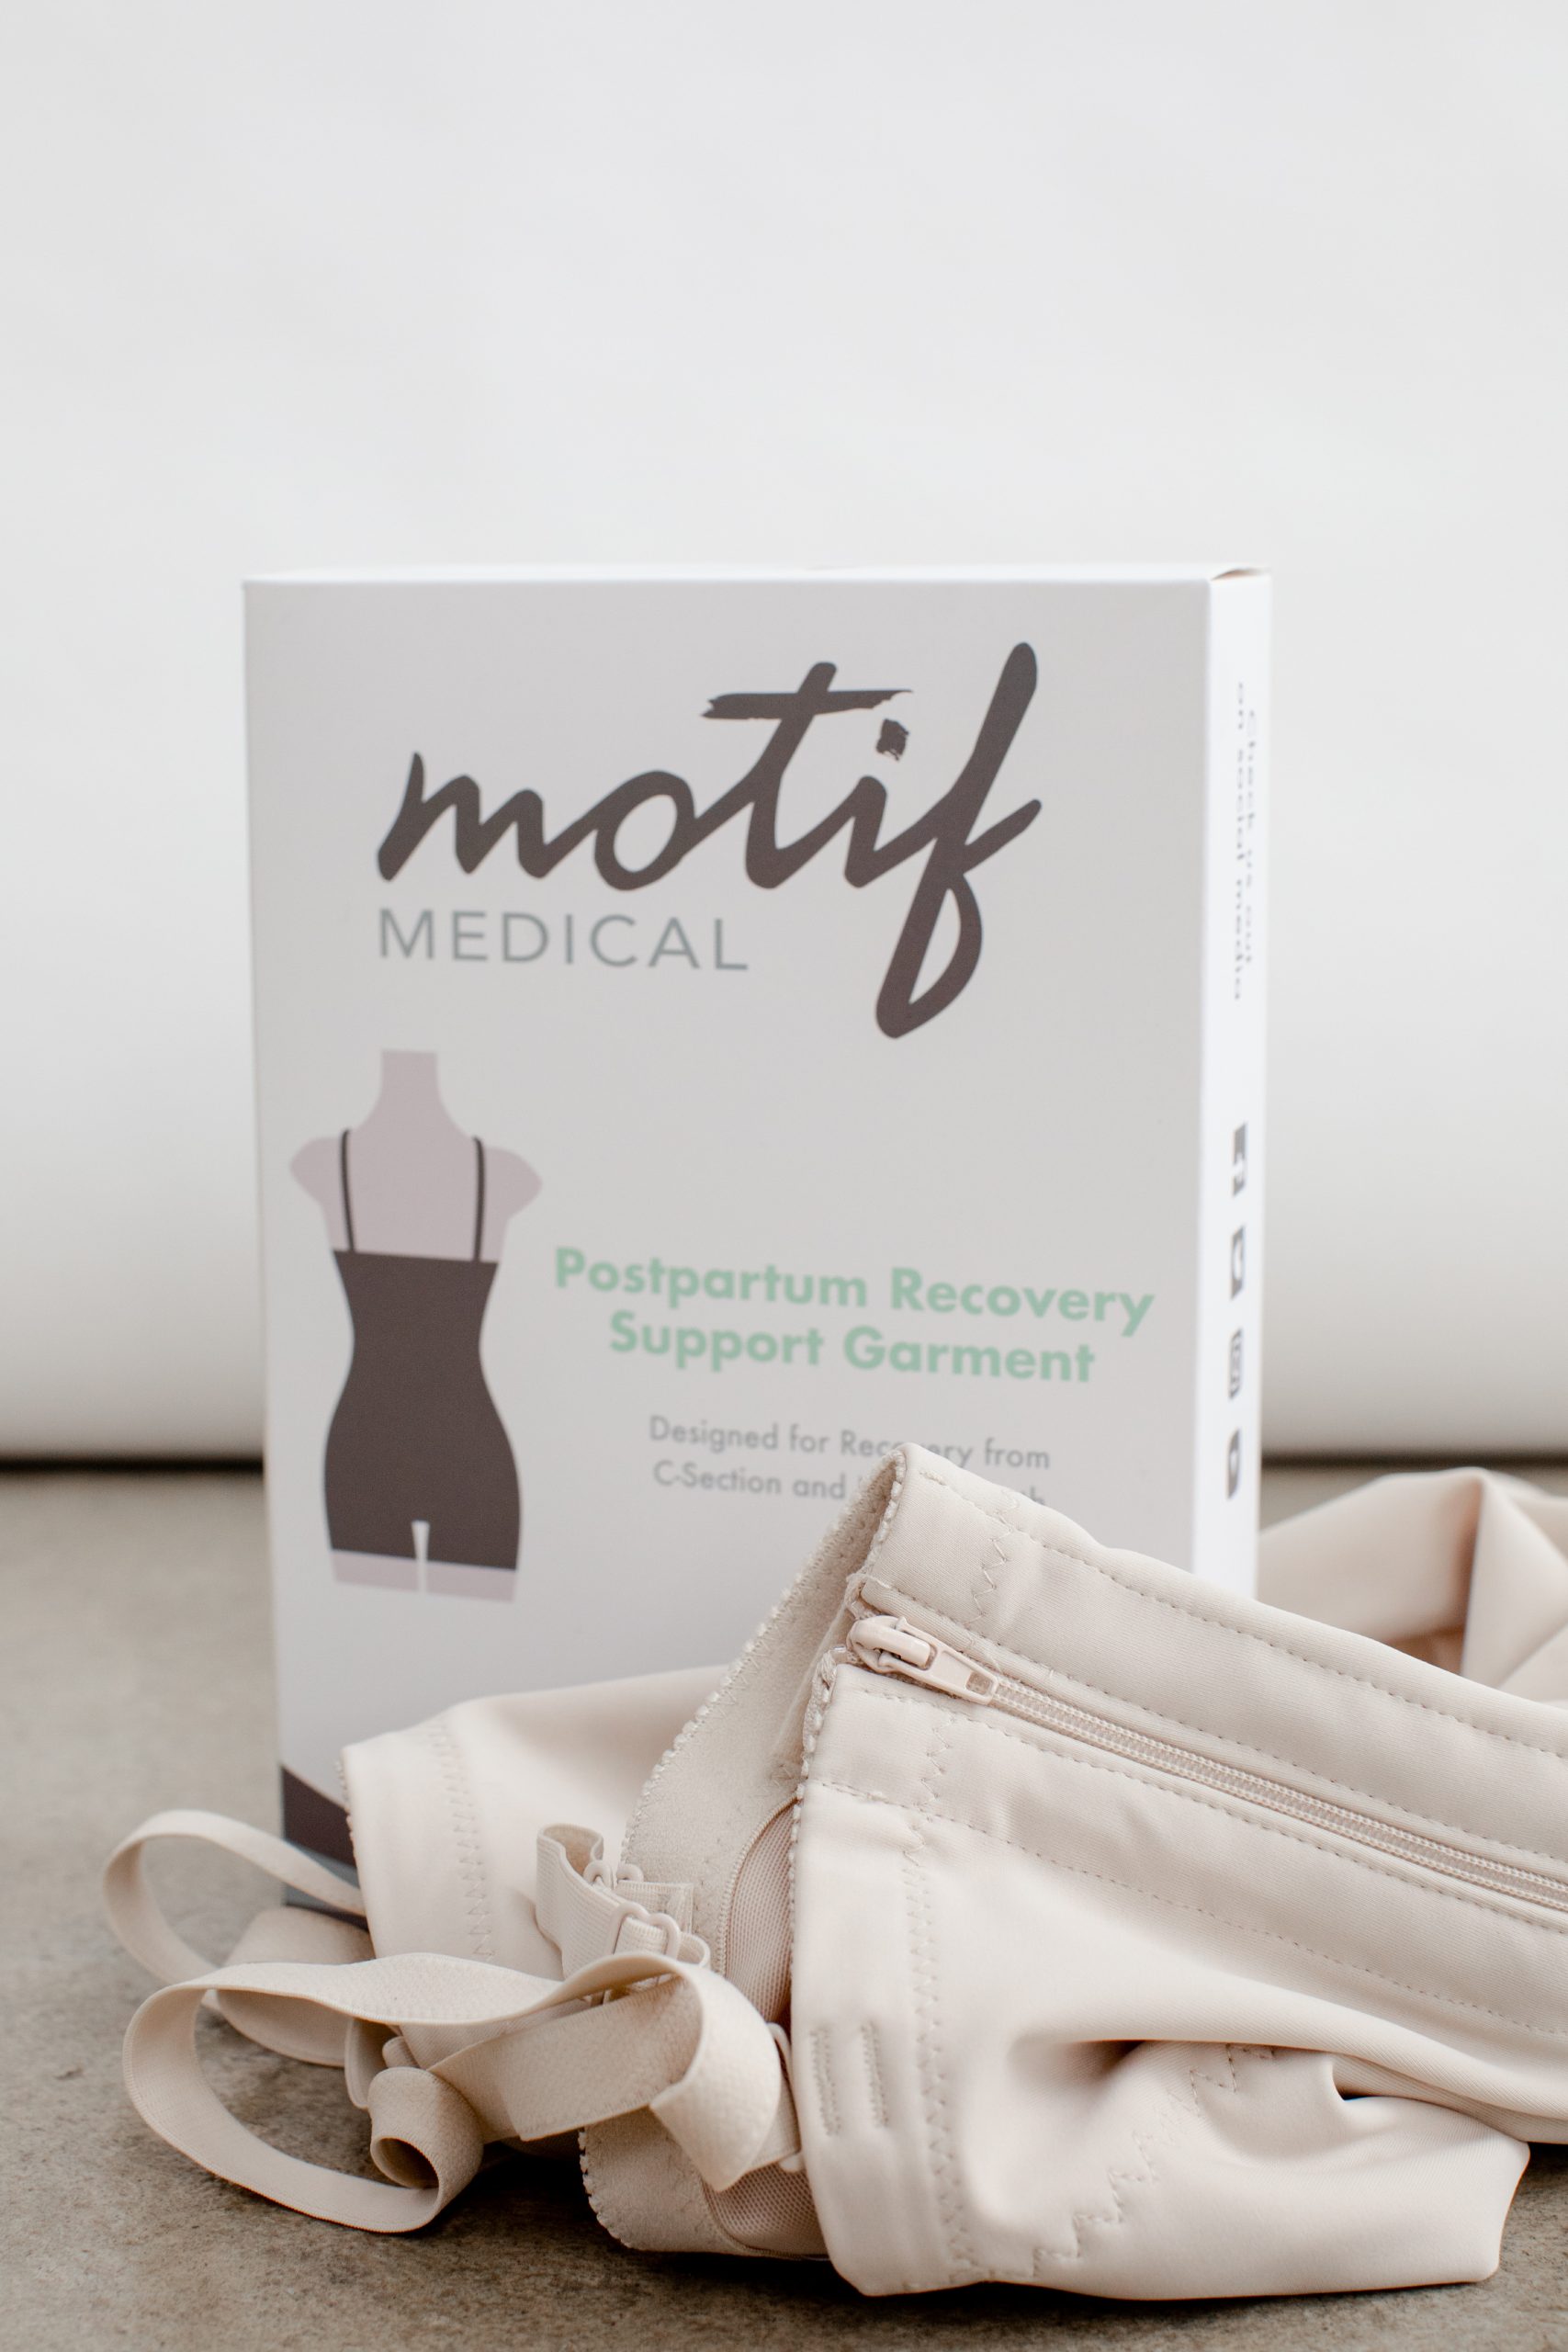 Postpartum Recovery Support Garment - C-Section and Natural Birth